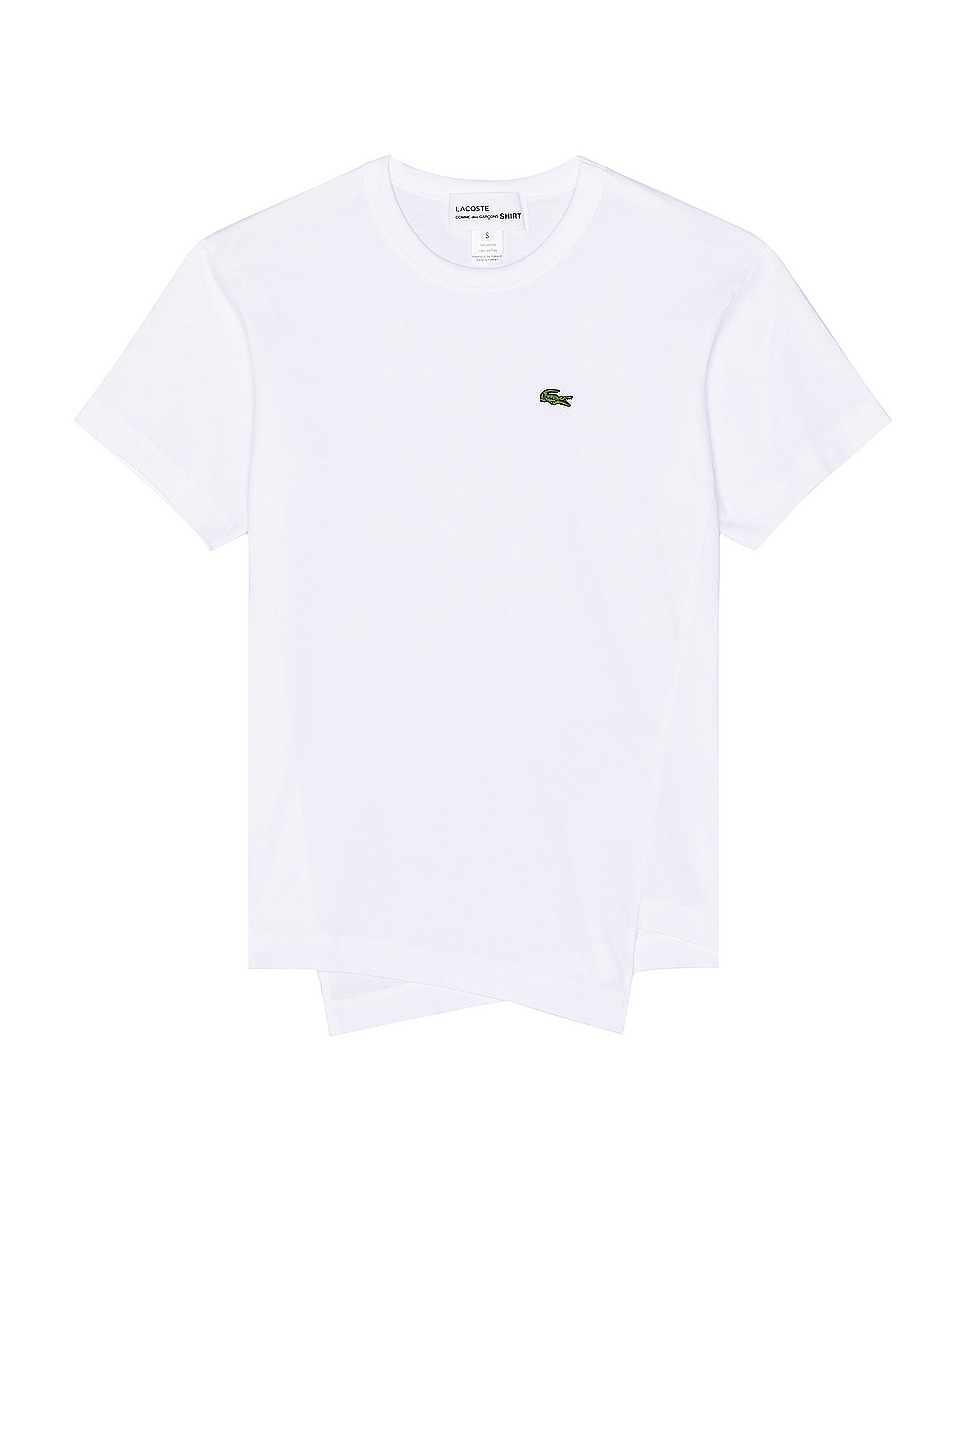 Image 1 of COMME des GARCONS SHIRT X Lacoste Tee in White